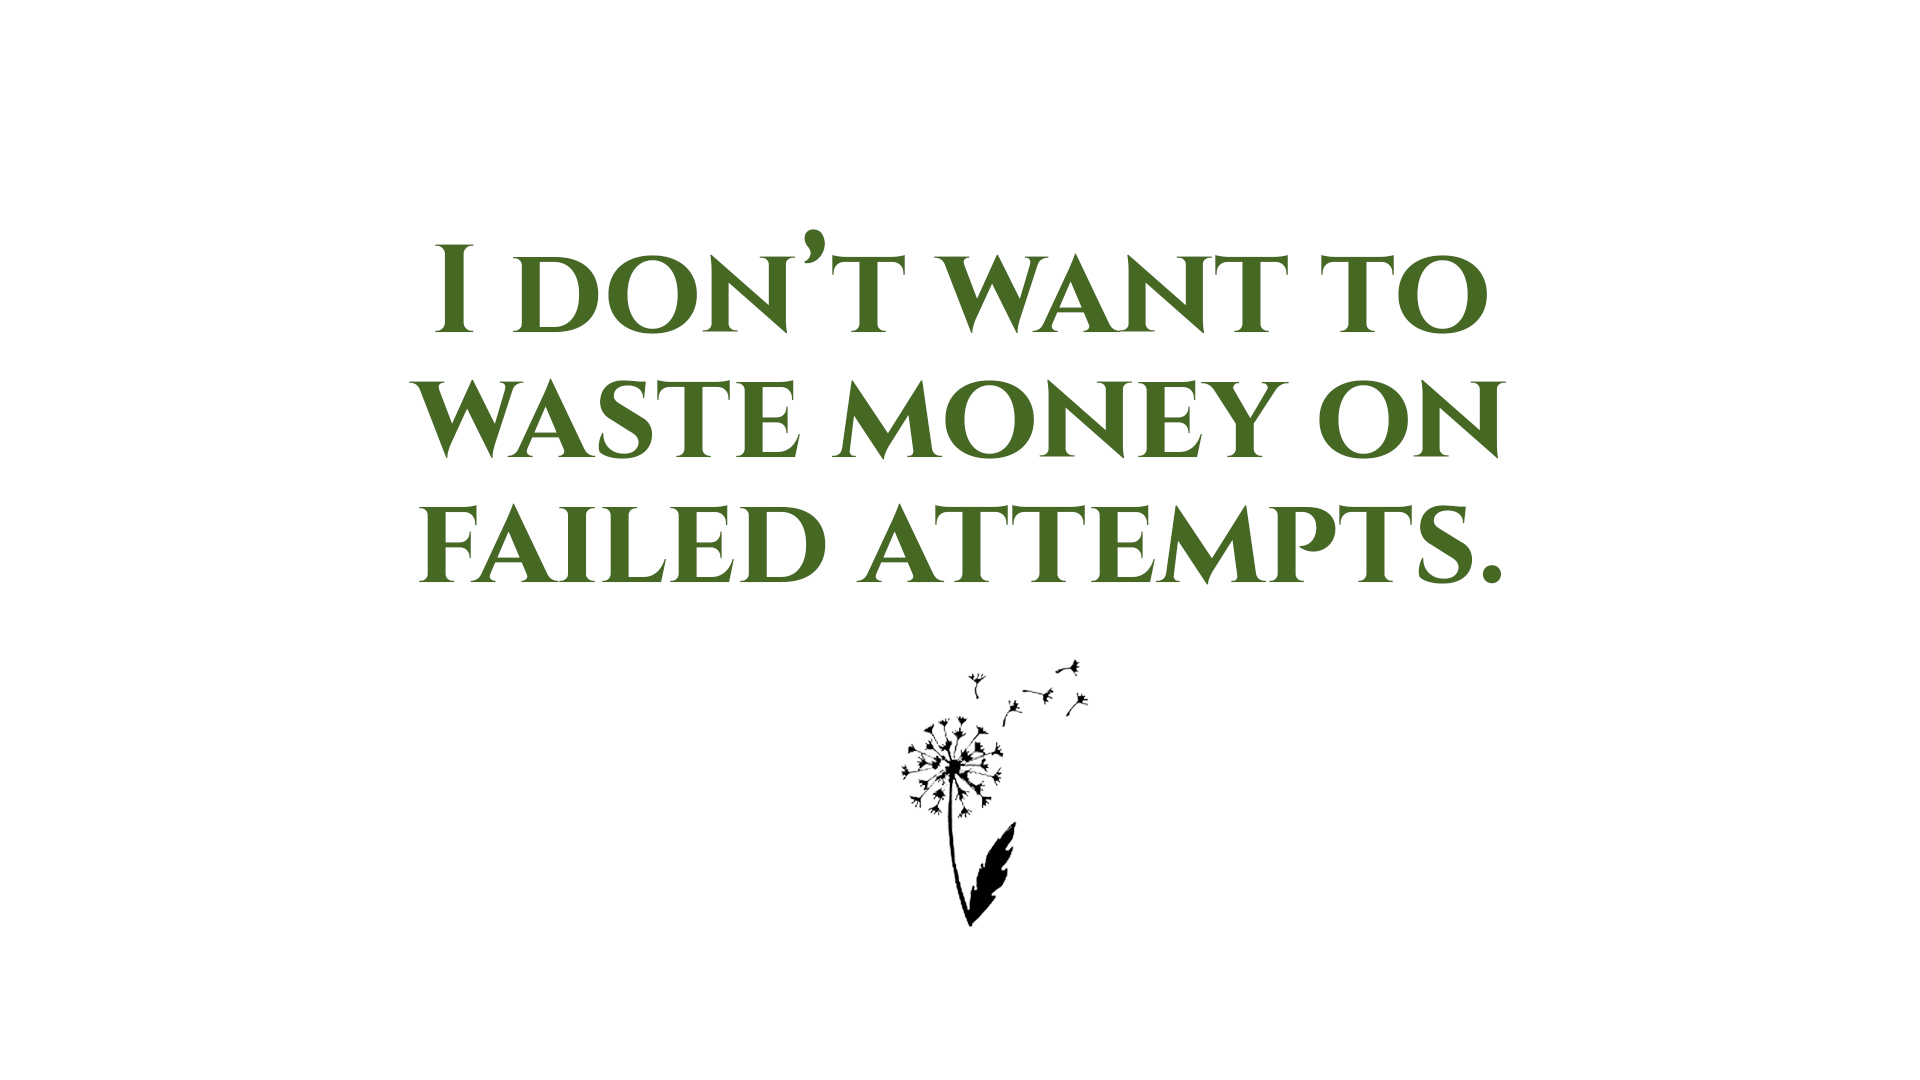 I don't wan't to waste money on failed attempts